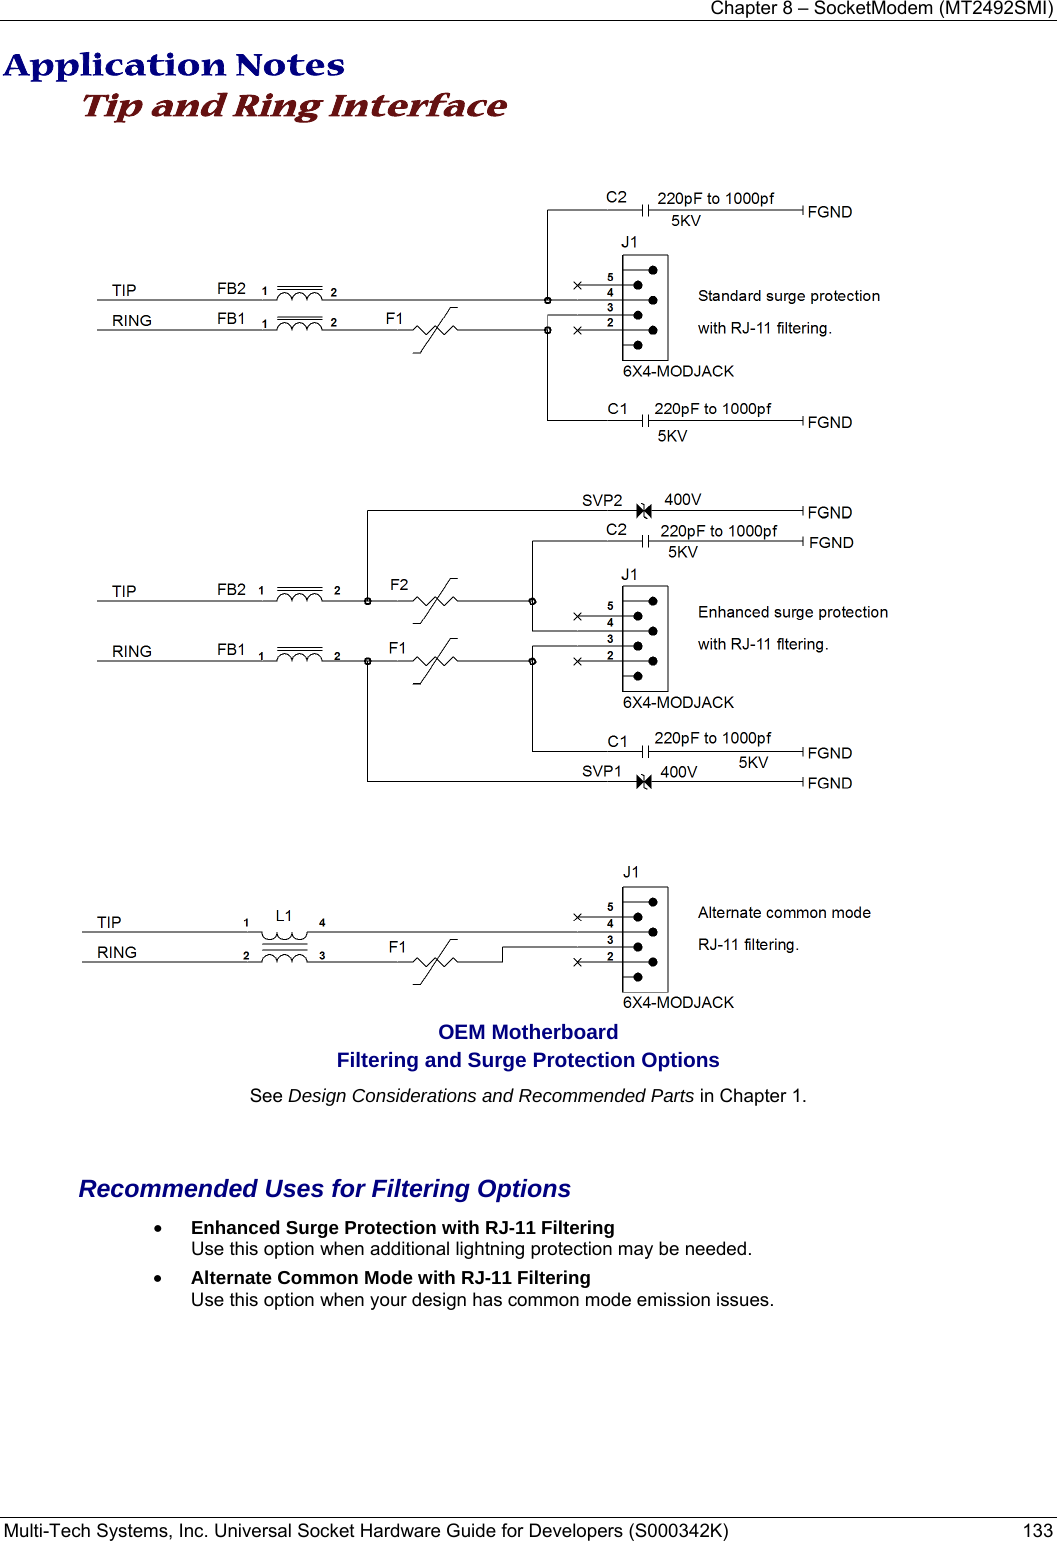 Chapter 8 – SocketModem (MT2492SMI) Multi-Tech Systems, Inc. Universal Socket Hardware Guide for Developers (S000342K)  133  Application Notes Tip and Ring Interface    OEM Motherboard Filtering and Surge Protection Options See Design Considerations and Recommended Parts in Chapter 1.   Recommended Uses for Filtering Options • Enhanced Surge Protection with RJ-11 Filtering Use this option when additional lightning protection may be needed. • Alternate Common Mode with RJ-11 Filtering Use this option when your design has common mode emission issues. 